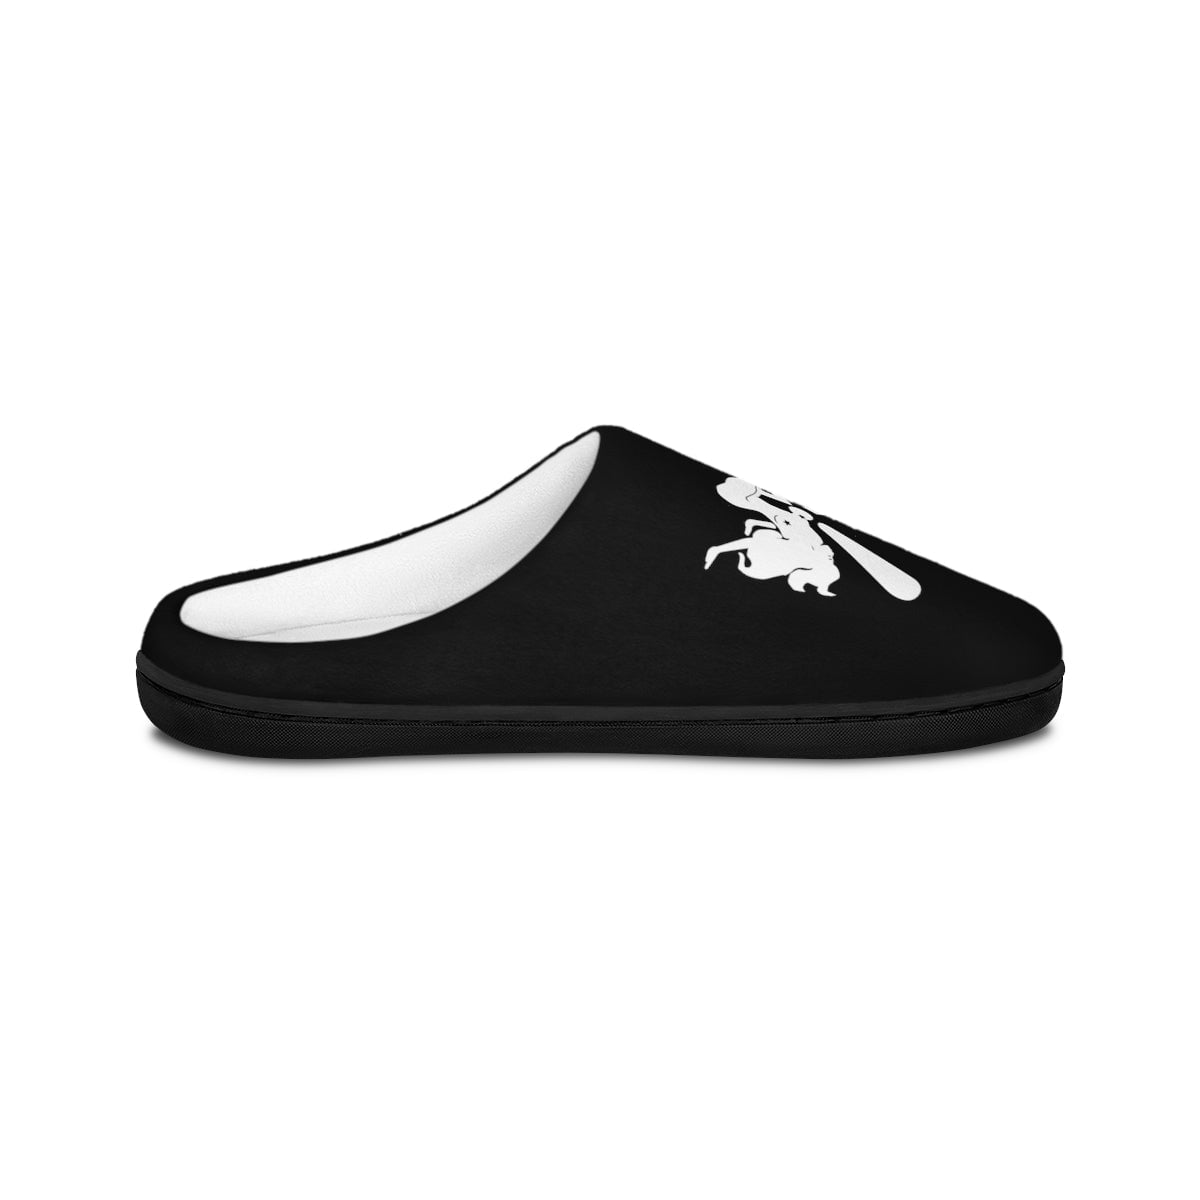 Bada Bing Mobsters club New Jersey Slippers